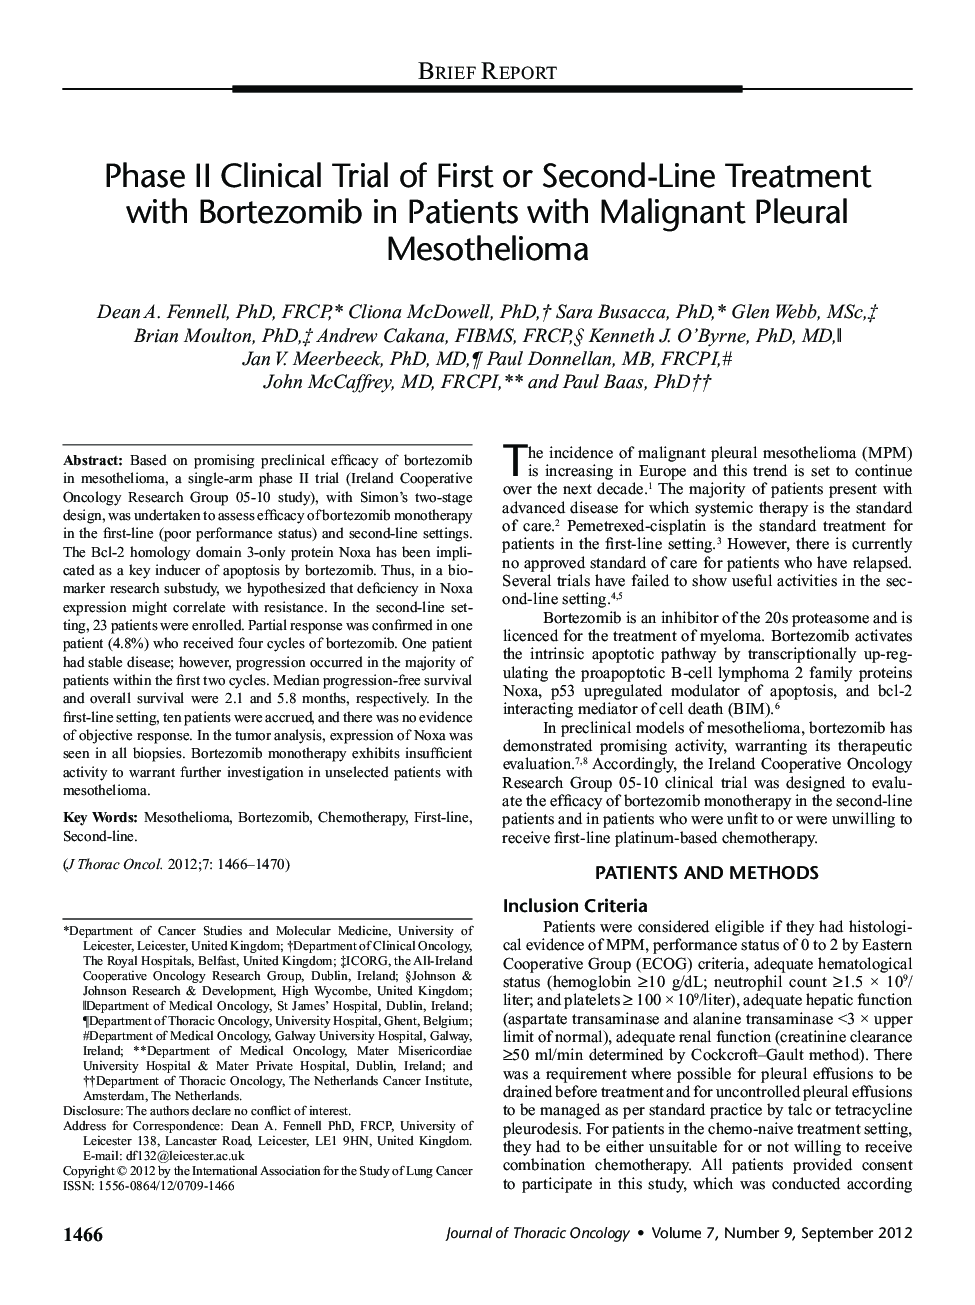 Phase II Clinical Trial of First or Second-Line Treatment with Bortezomib in Patients with Malignant Pleural Mesothelioma 